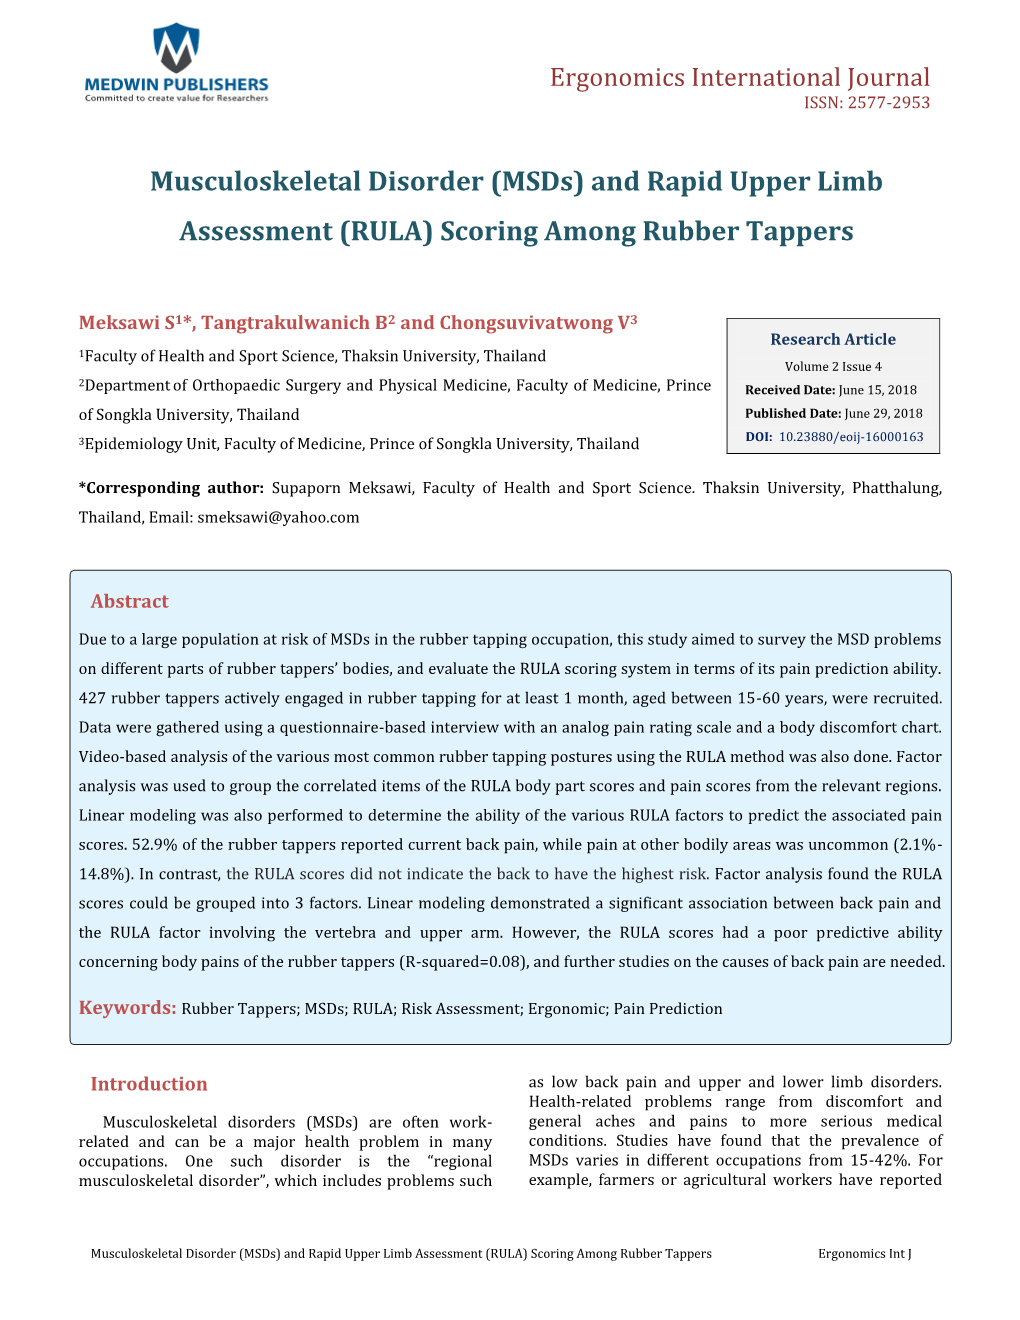 Musculoskeletal Disorder (Msds) and Rapid Upper Limb Assessment (RULA) Scoring Among Rubber Tappers